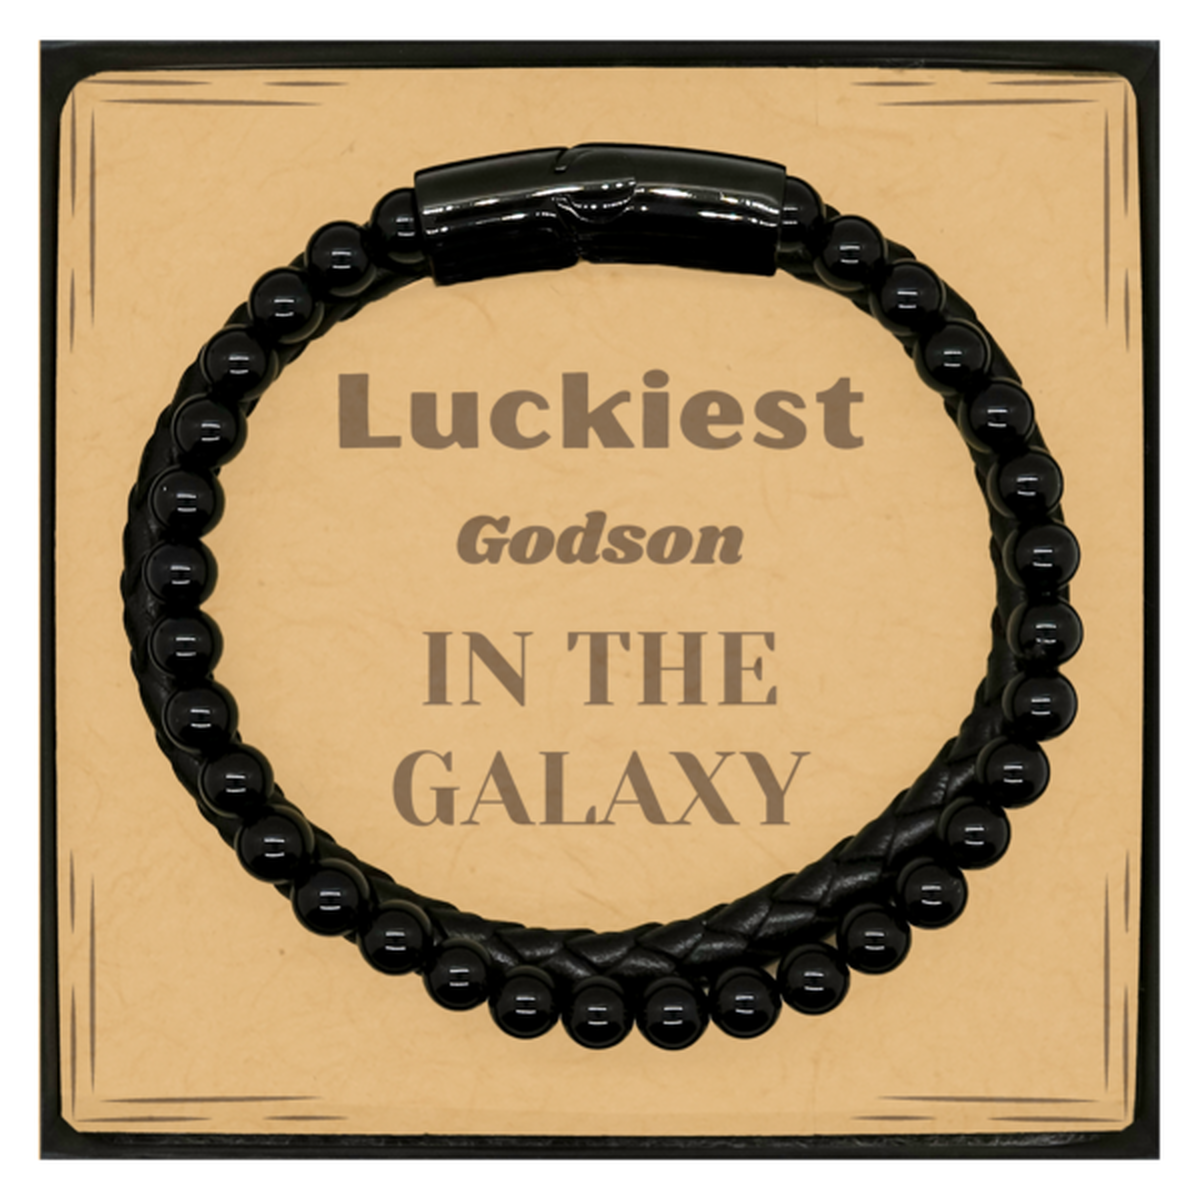 Luckiest Godson in the Galaxy, To My Godson Message Card Gifts, Christmas Godson Stone Leather Bracelets Gifts, X-mas Birthday Unique Gifts For Godson Men Women